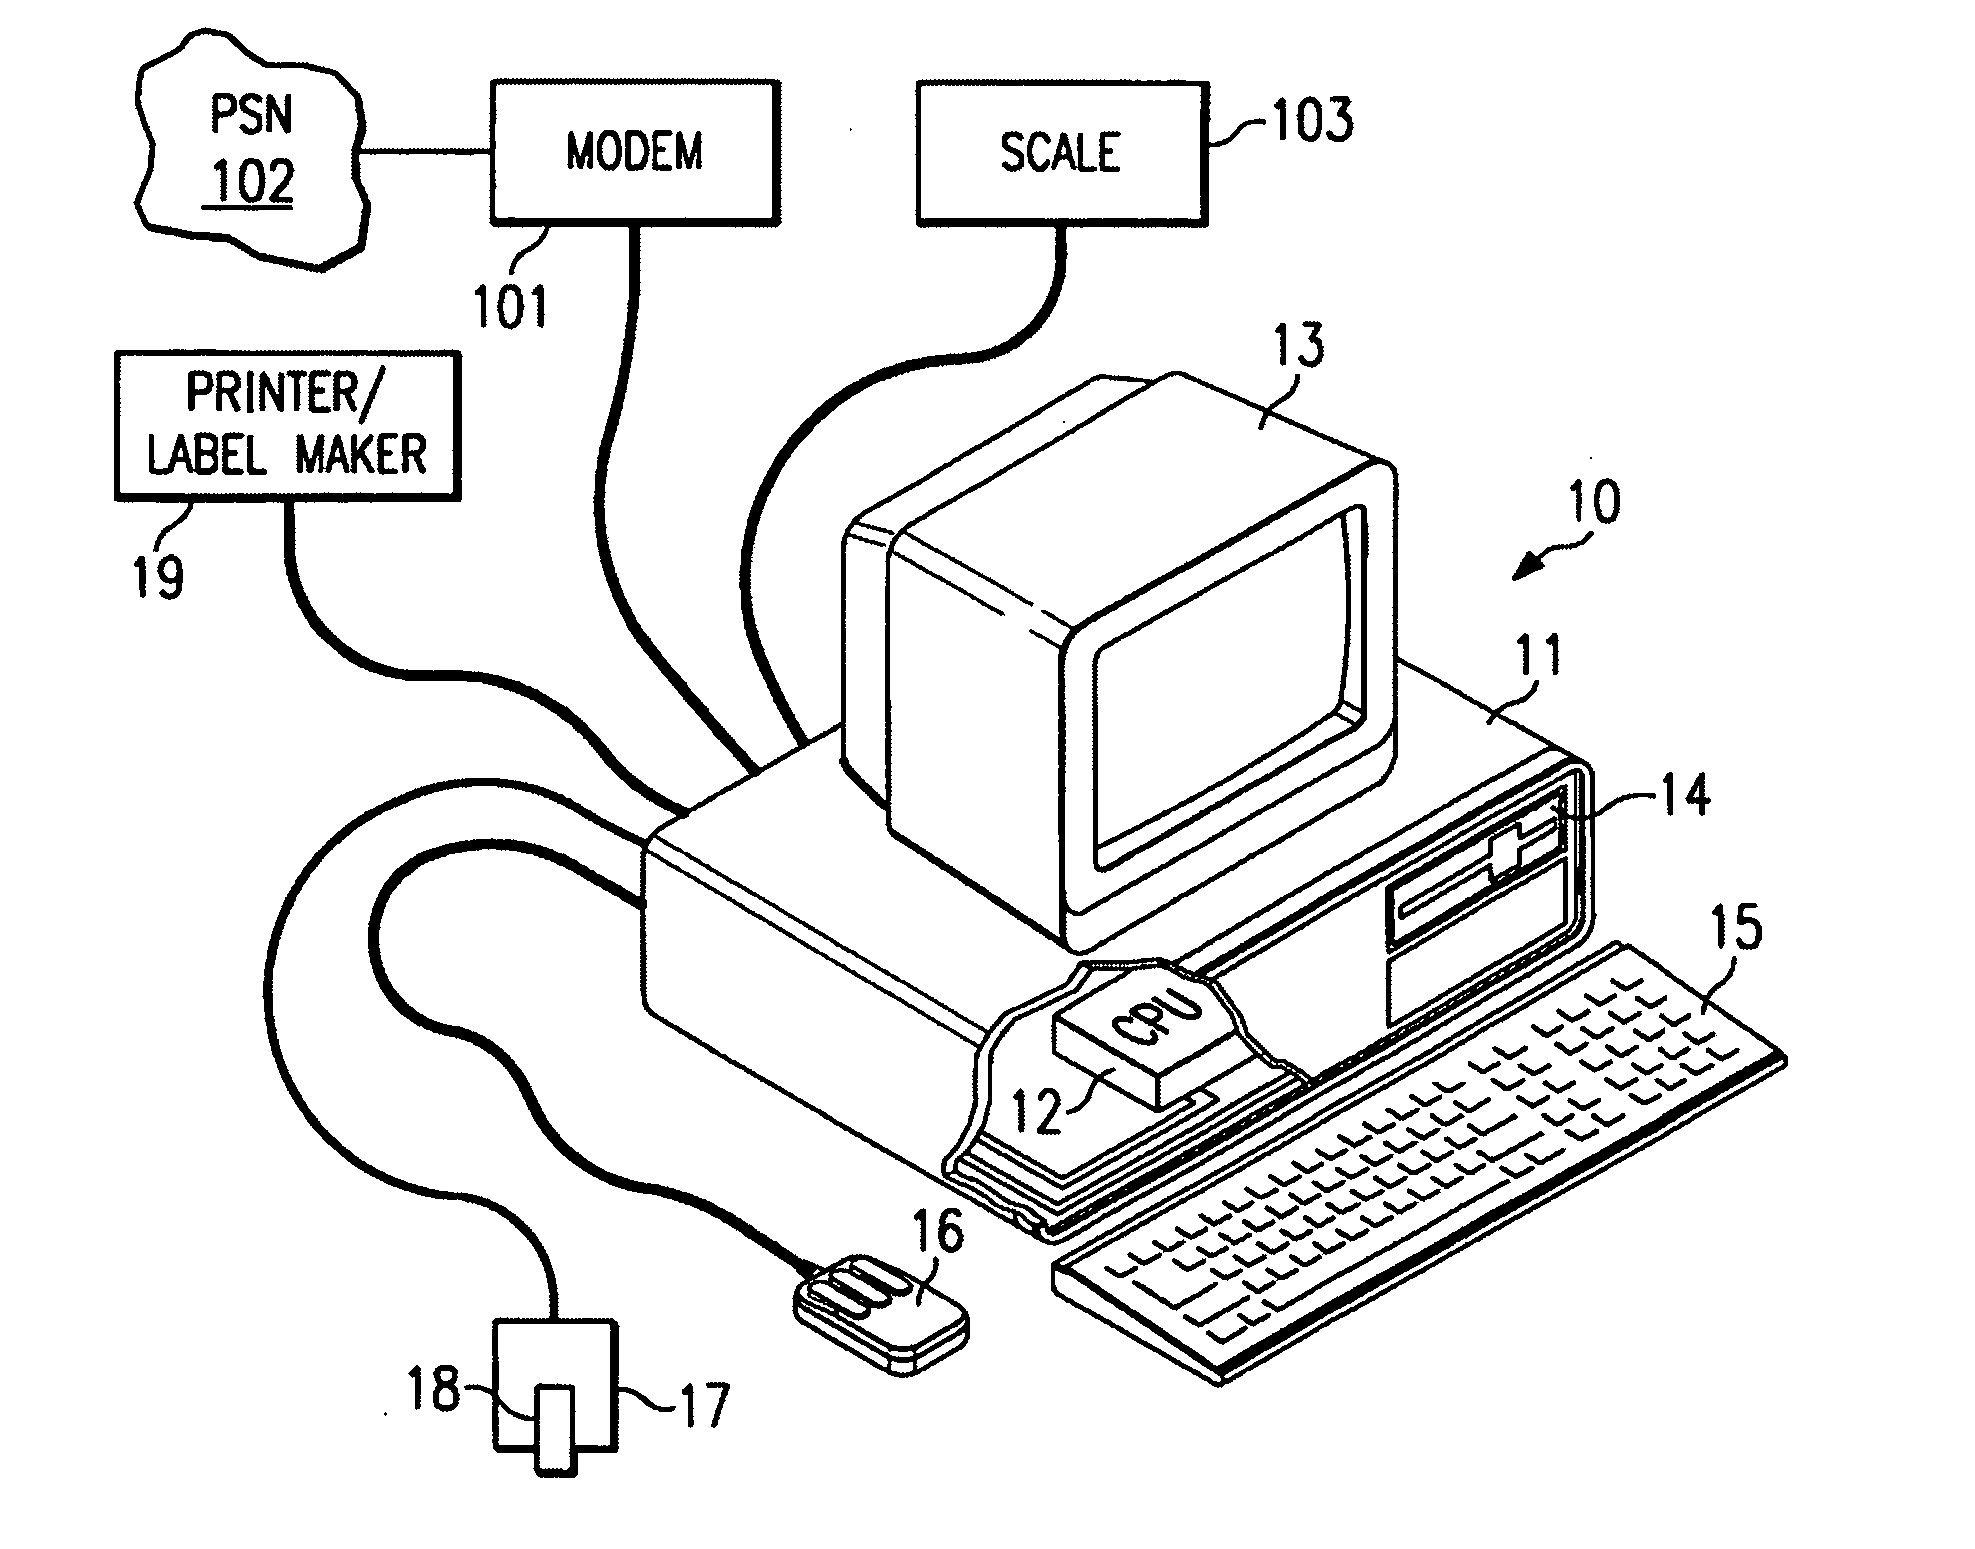 System and method for generating personalized postage indicia